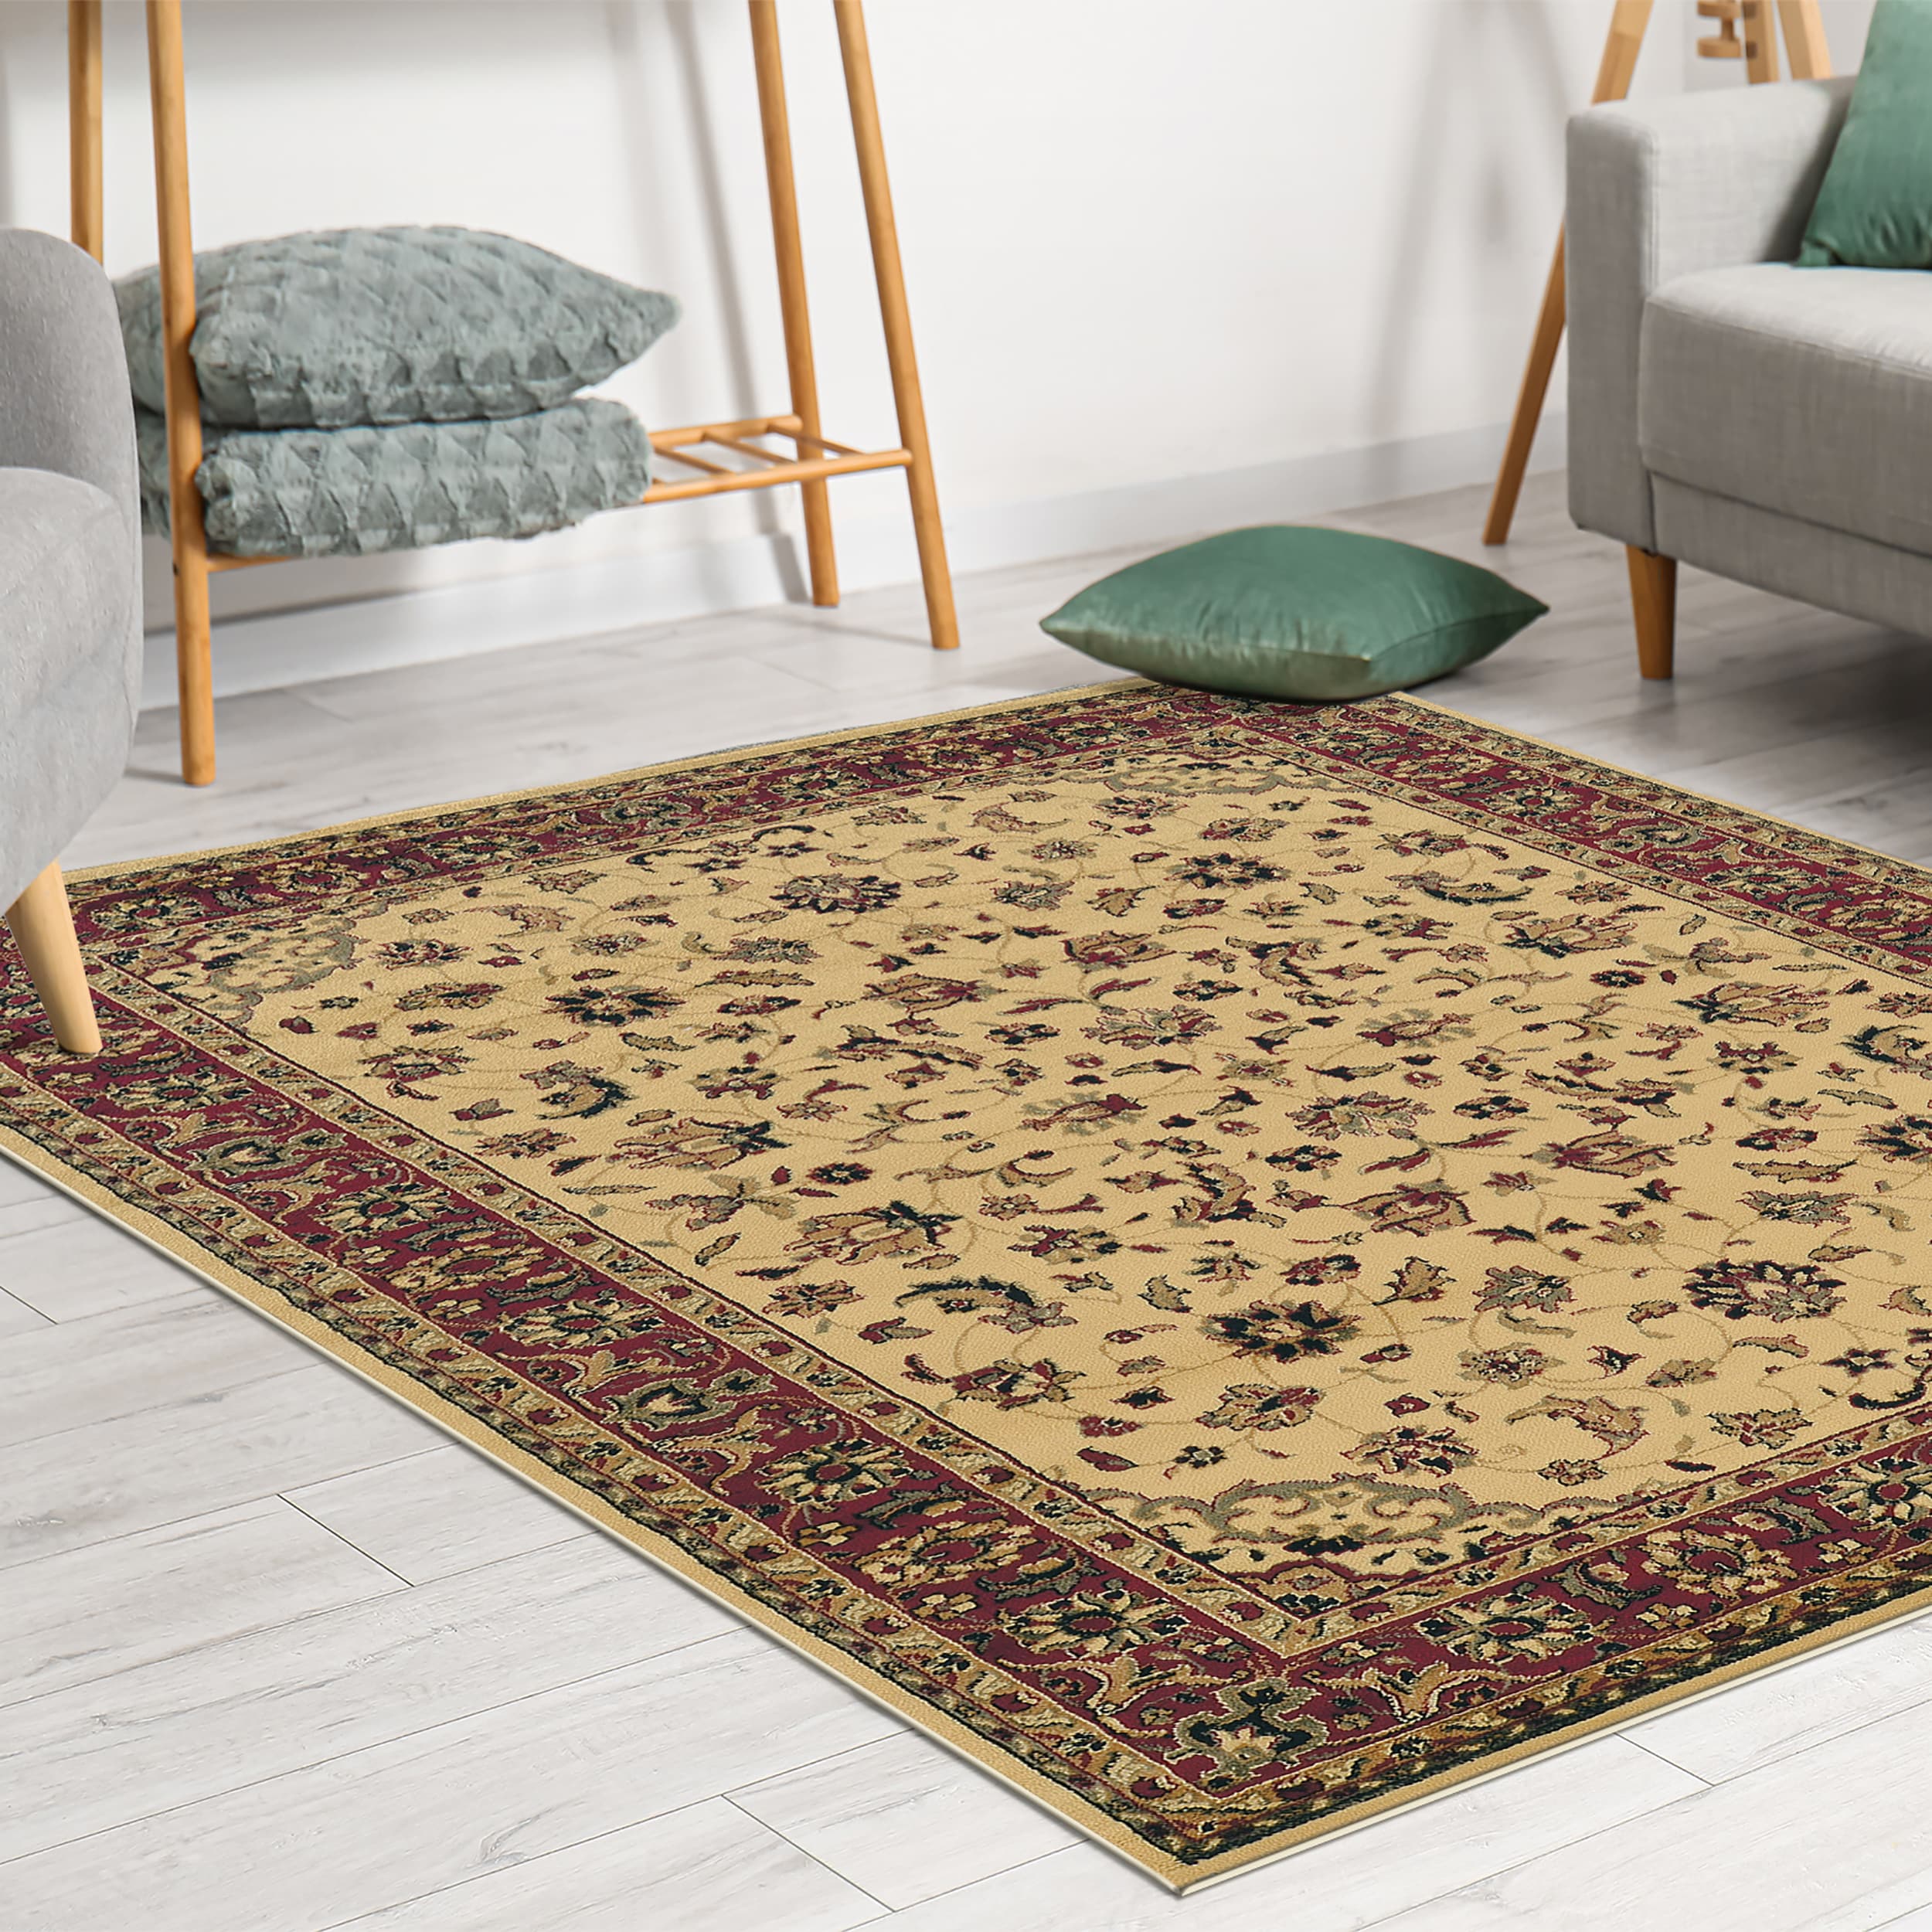 Oriental Machine Woven Rectangle 6' x 9' Synthetic Area Rug in Blue/Brown/Ivory Bungalow Rose